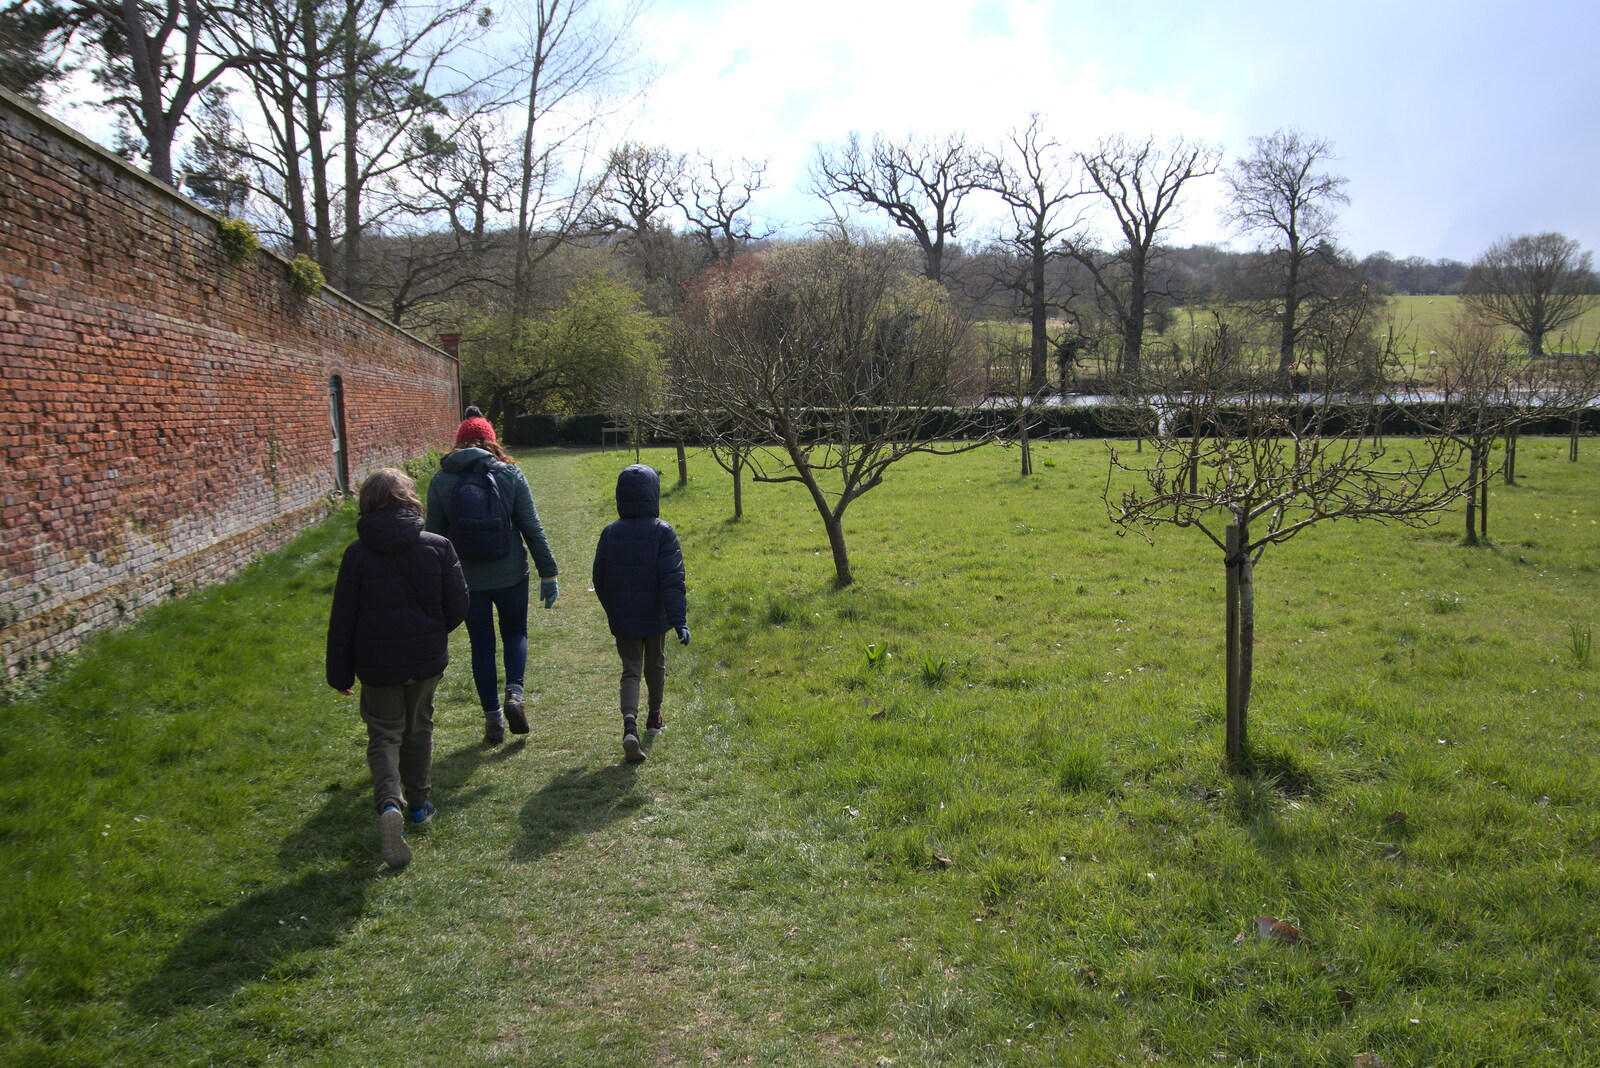 We walk around the walled garden from A Return to Ickworth House, Horringer, Suffolk - 11th April 2021